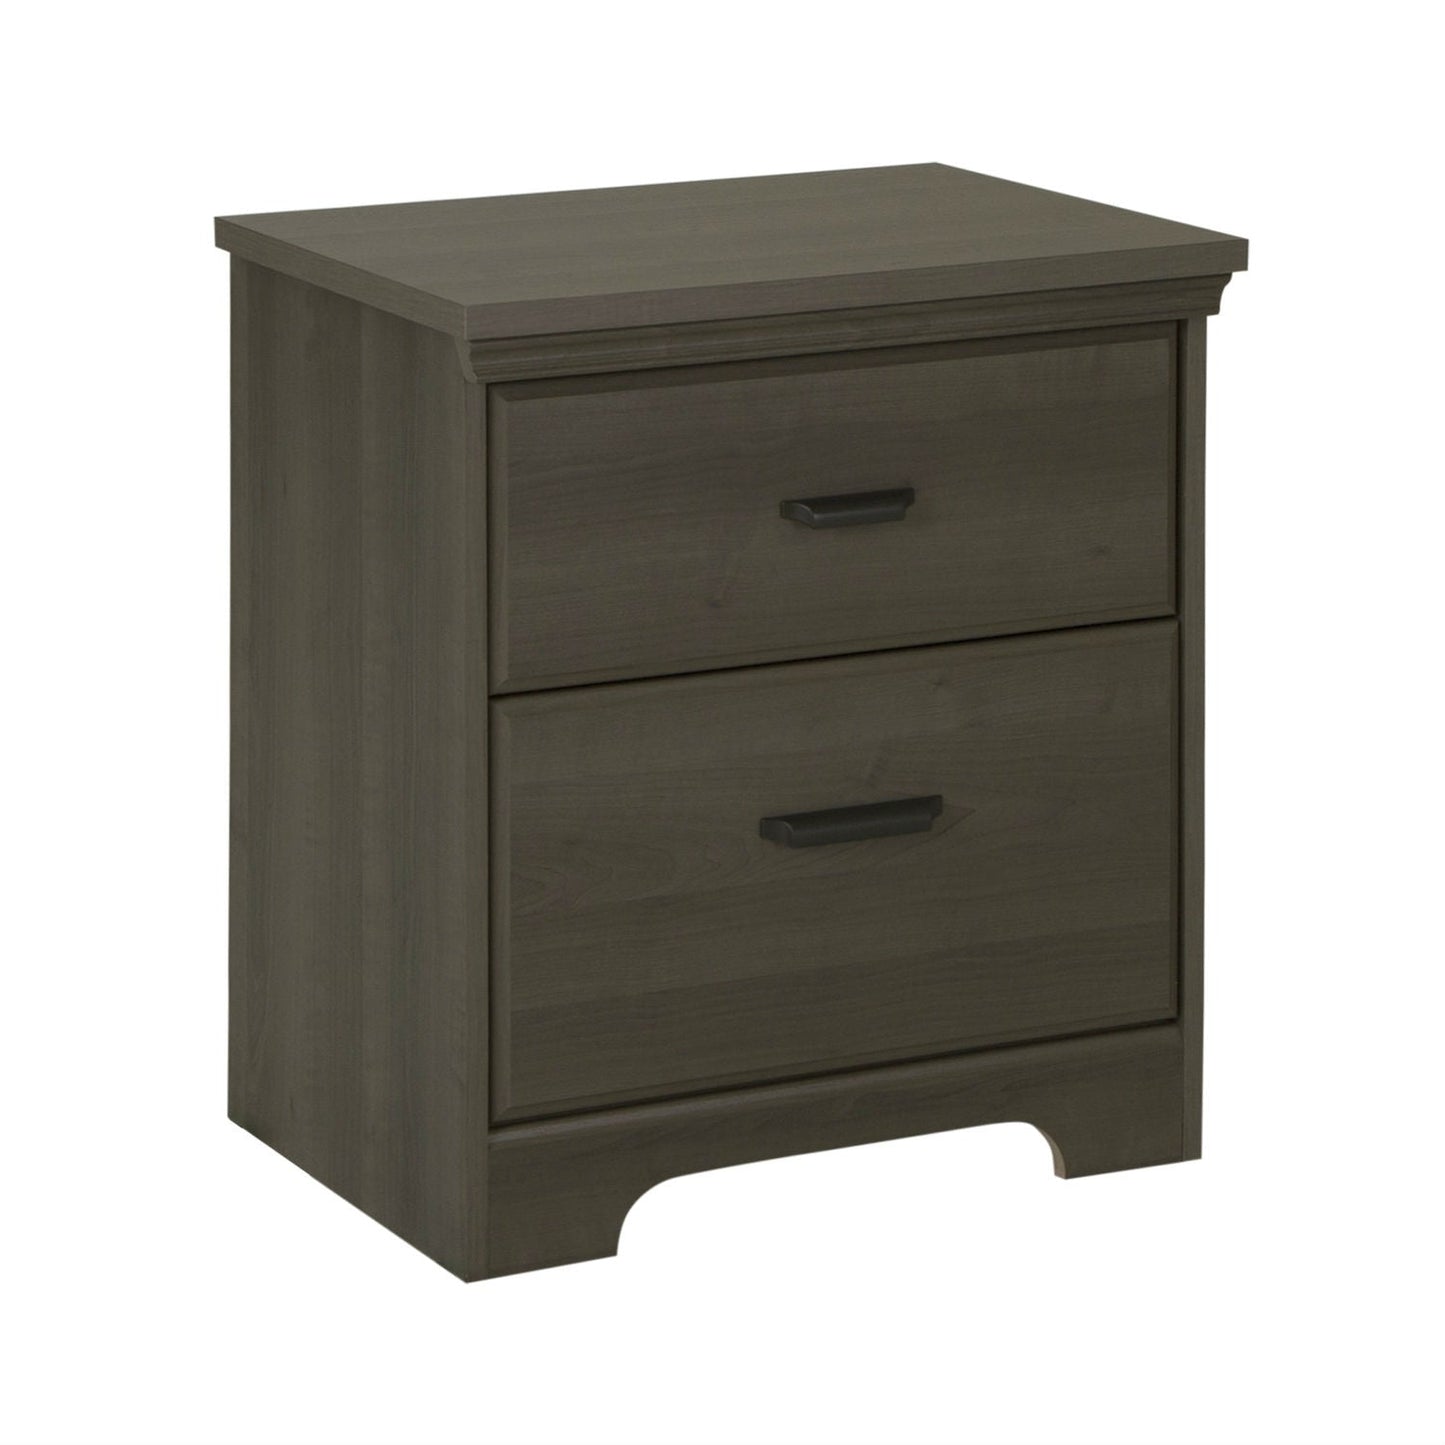 2-Drawer Bedroom Nightstand in Gray Maple Wood Finish-Novel Home